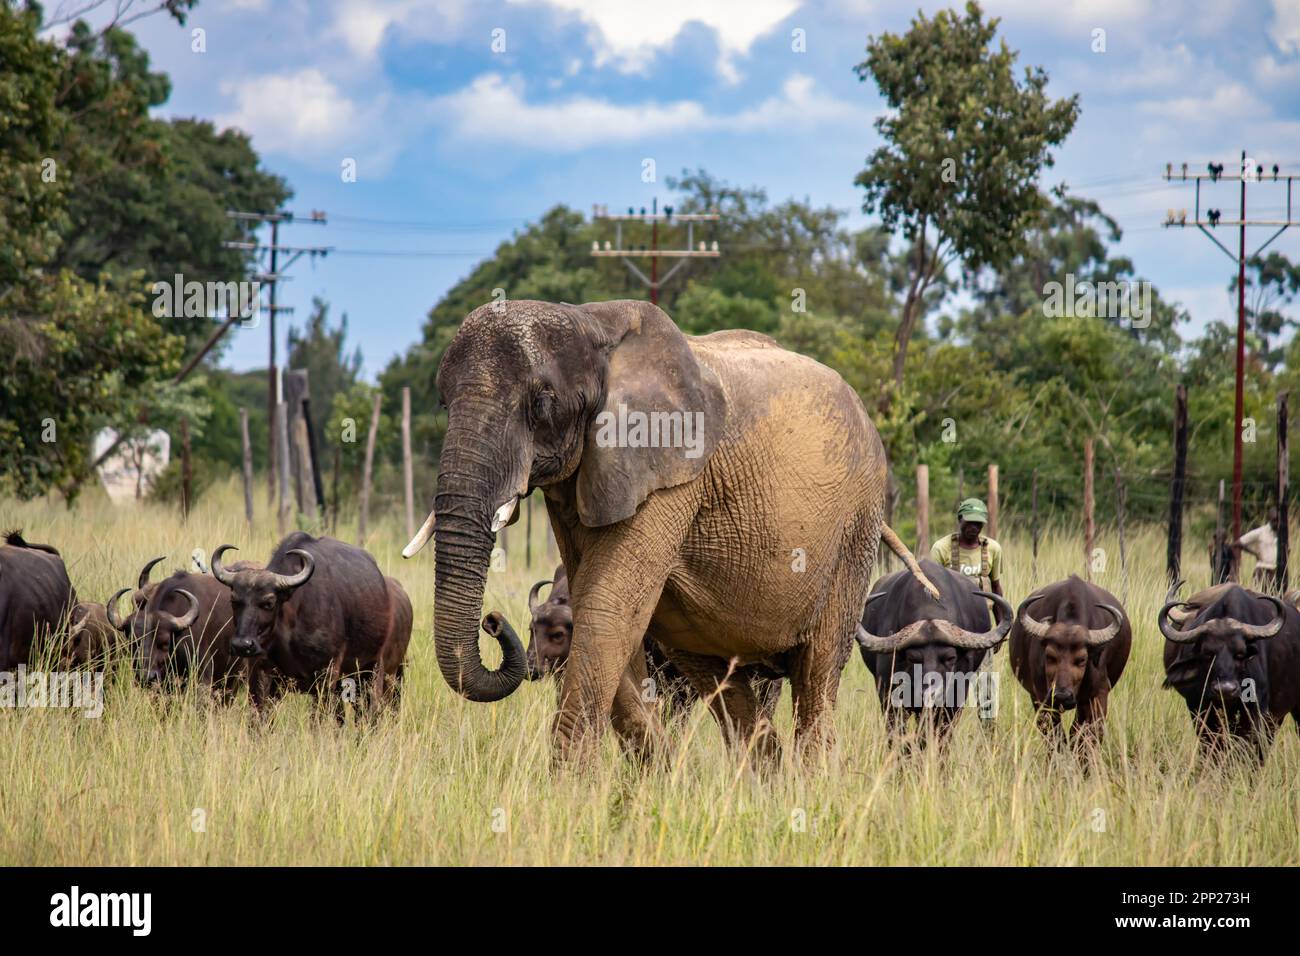 Members of big five African animals, elephant and buffalo walking together in savannah in African open vehicle safari in Zimbabwe, Imire Stock Photo